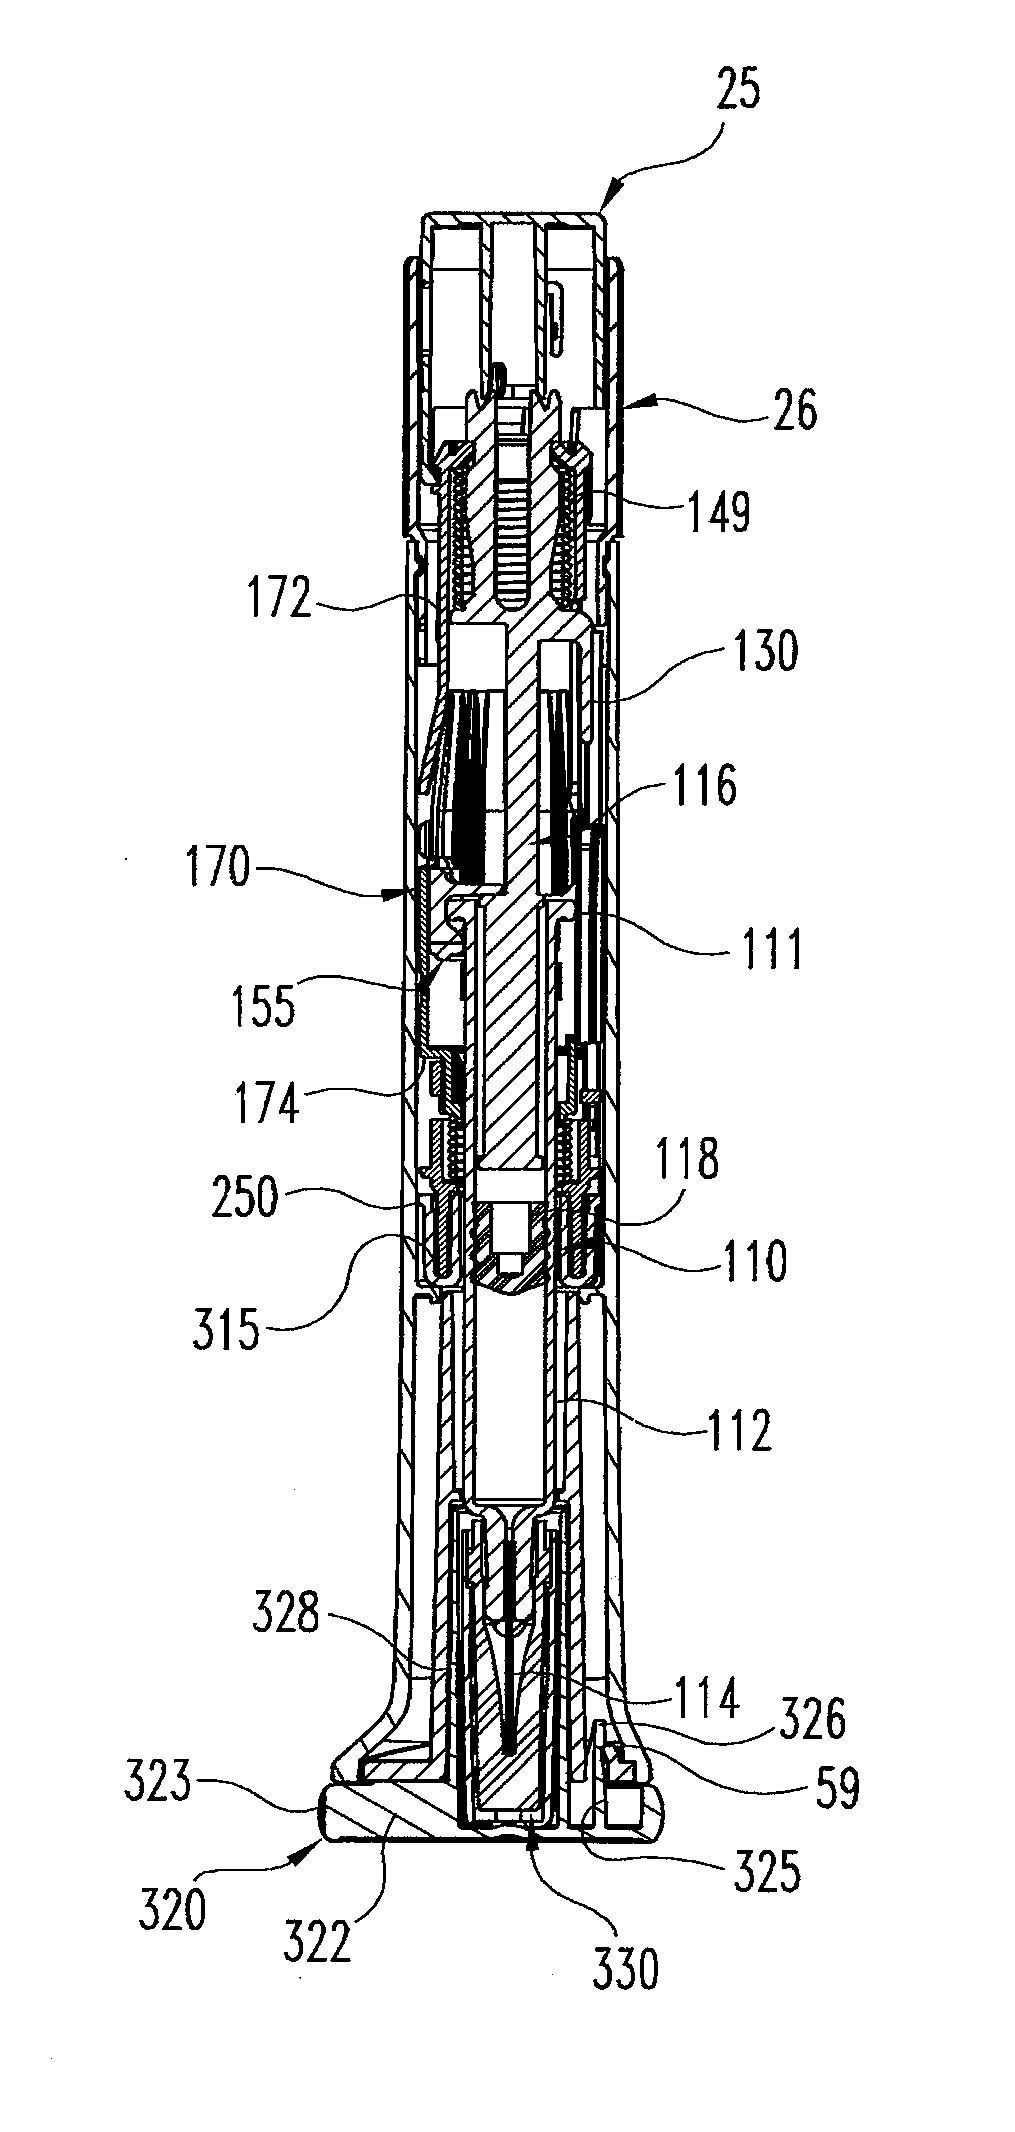 Automatic Injection Device With Delay Mechanism Including Dual Functioning Biasing Member